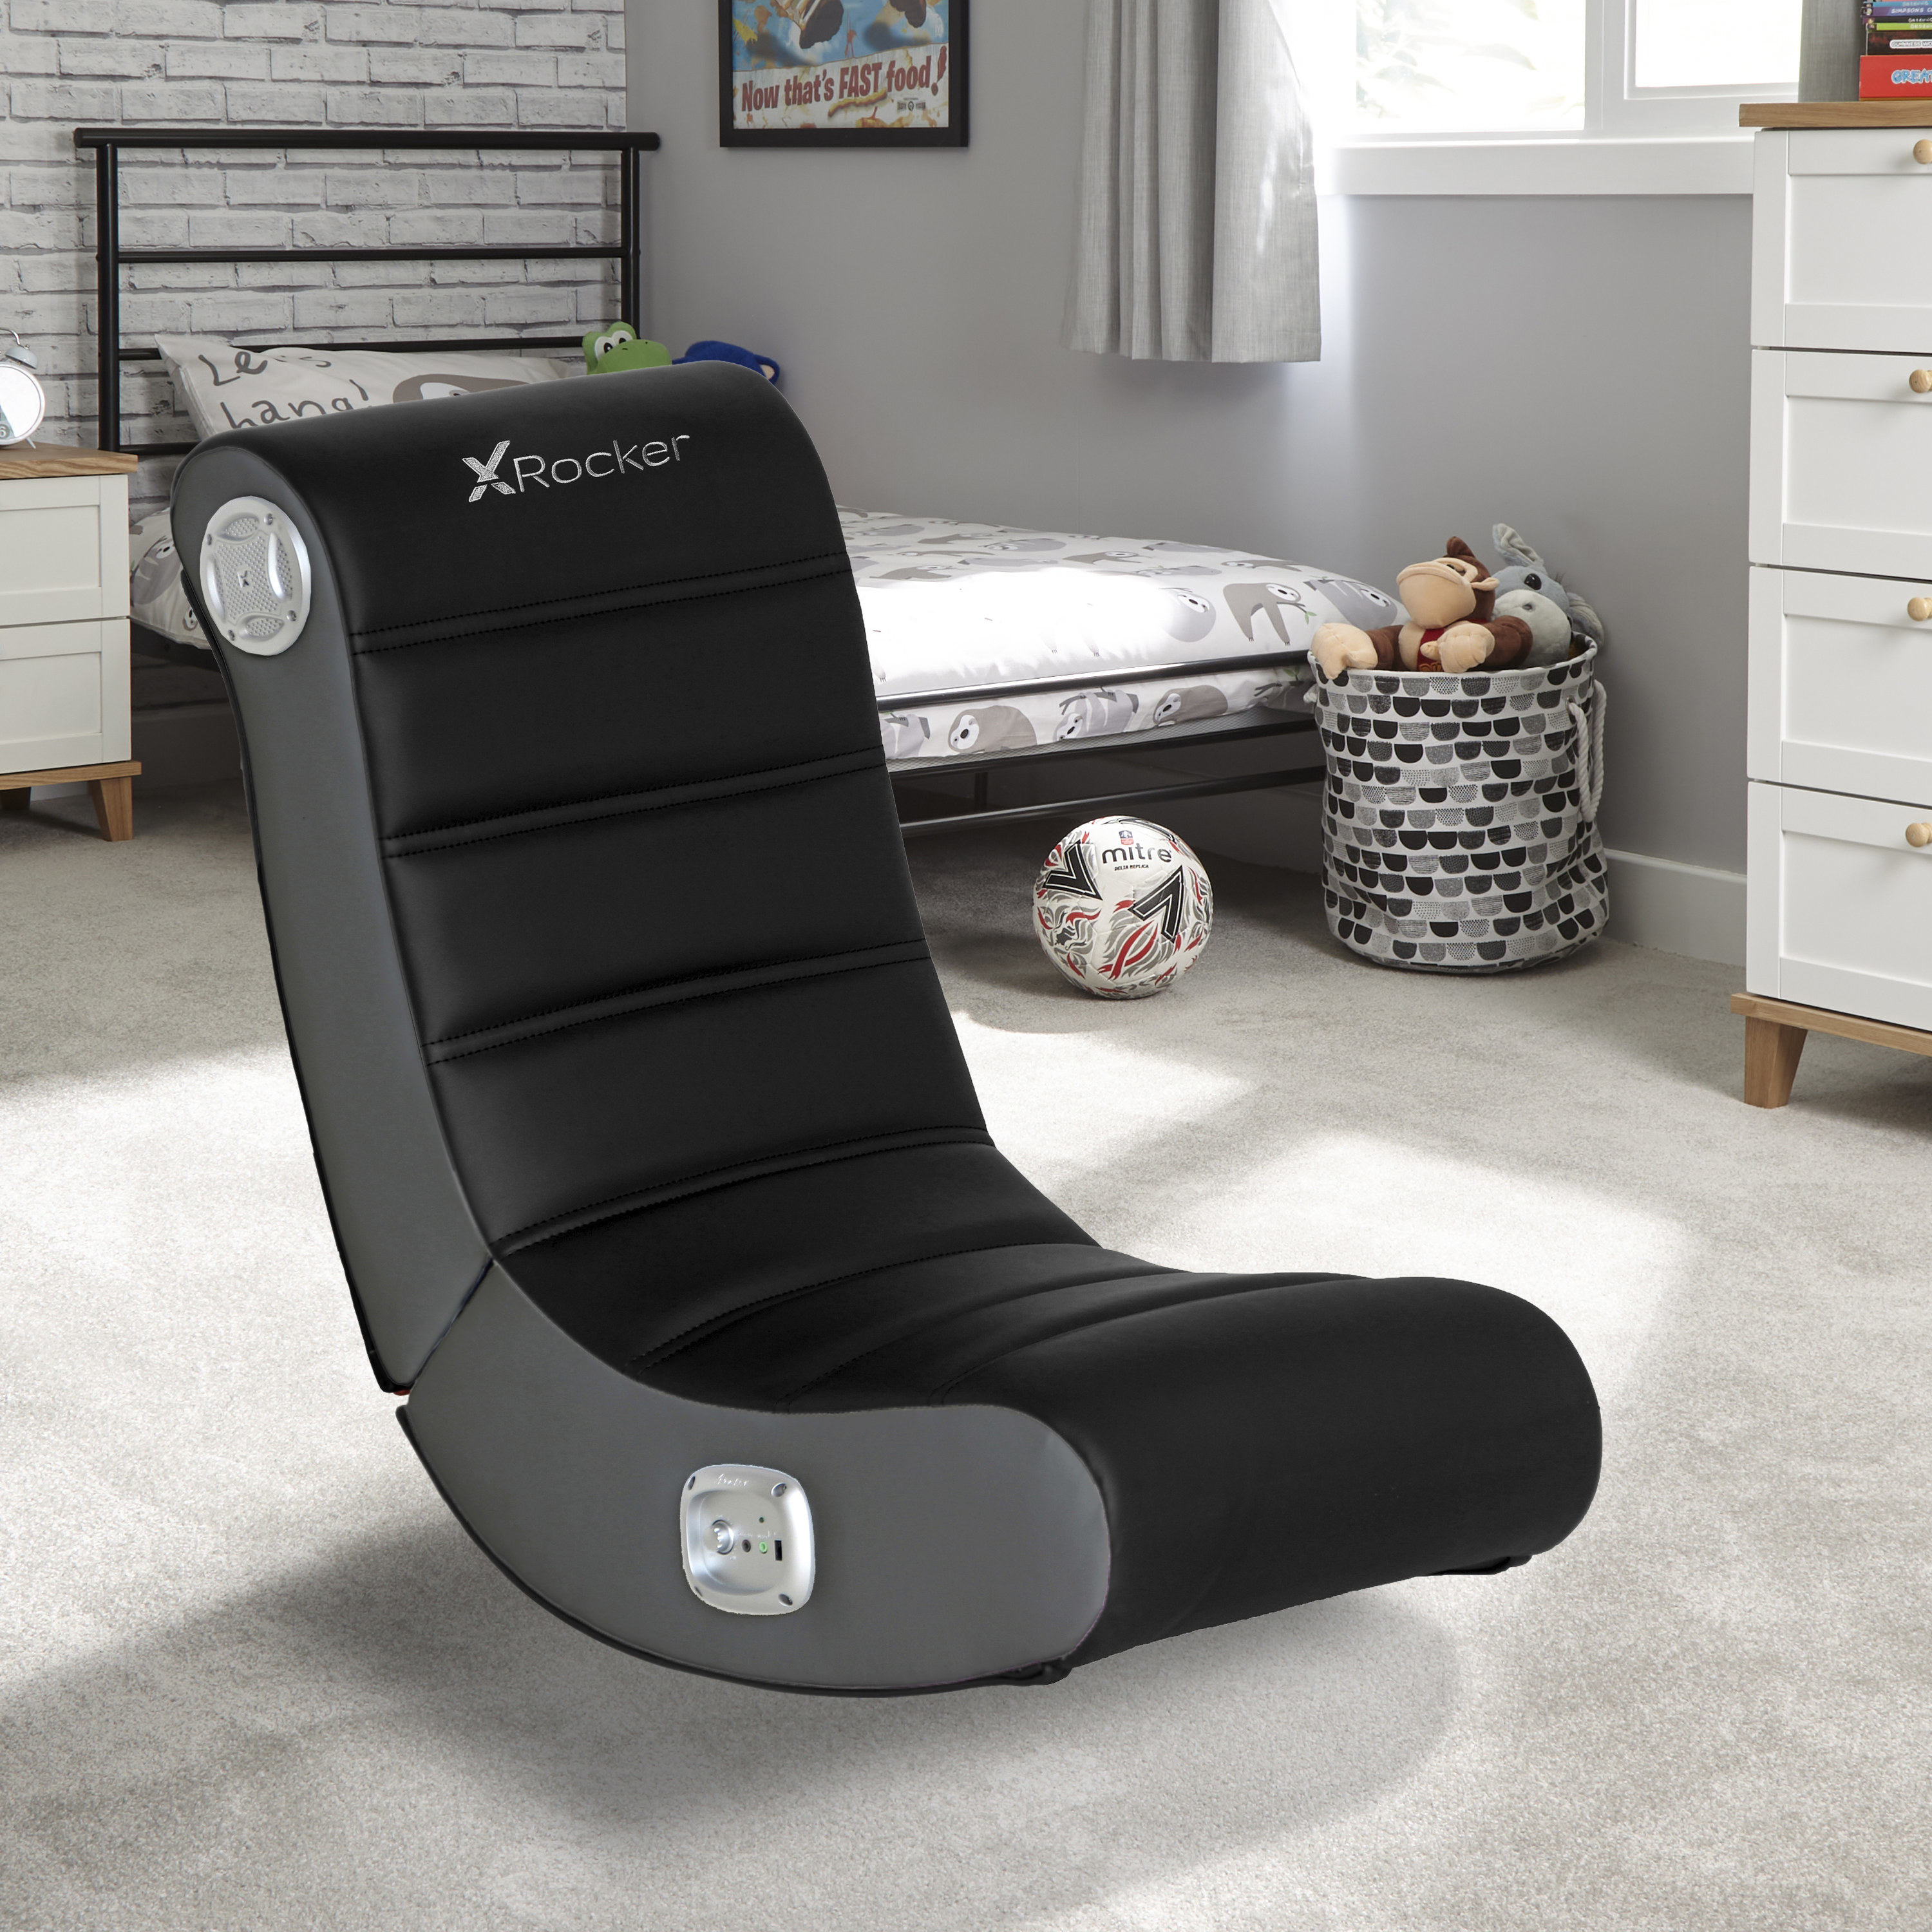 The black gaming chair in a bedroom